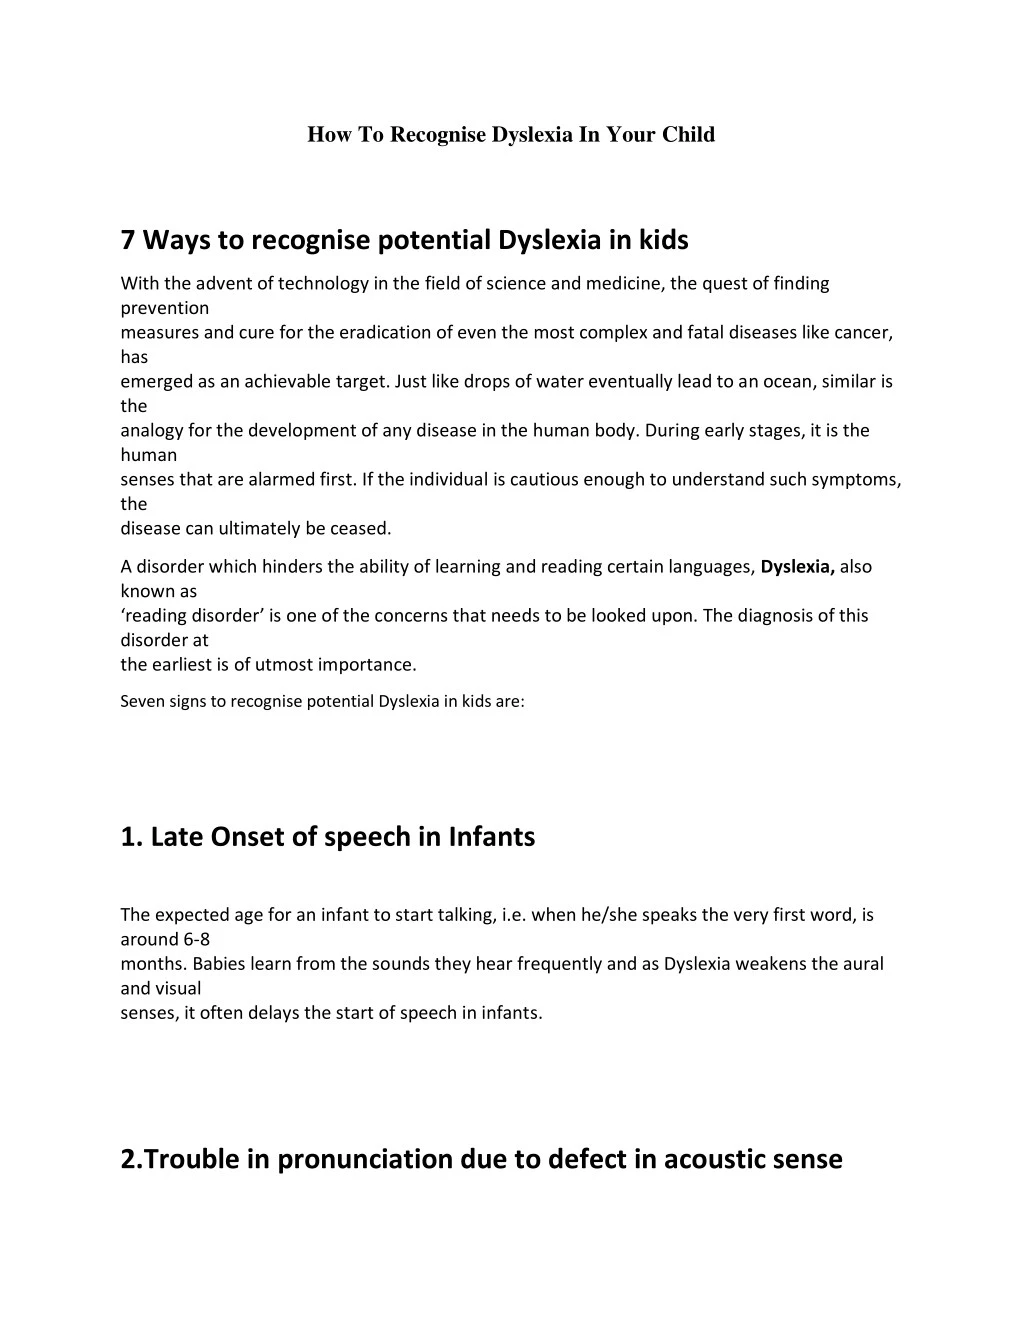 how to recognise dyslexia in your child